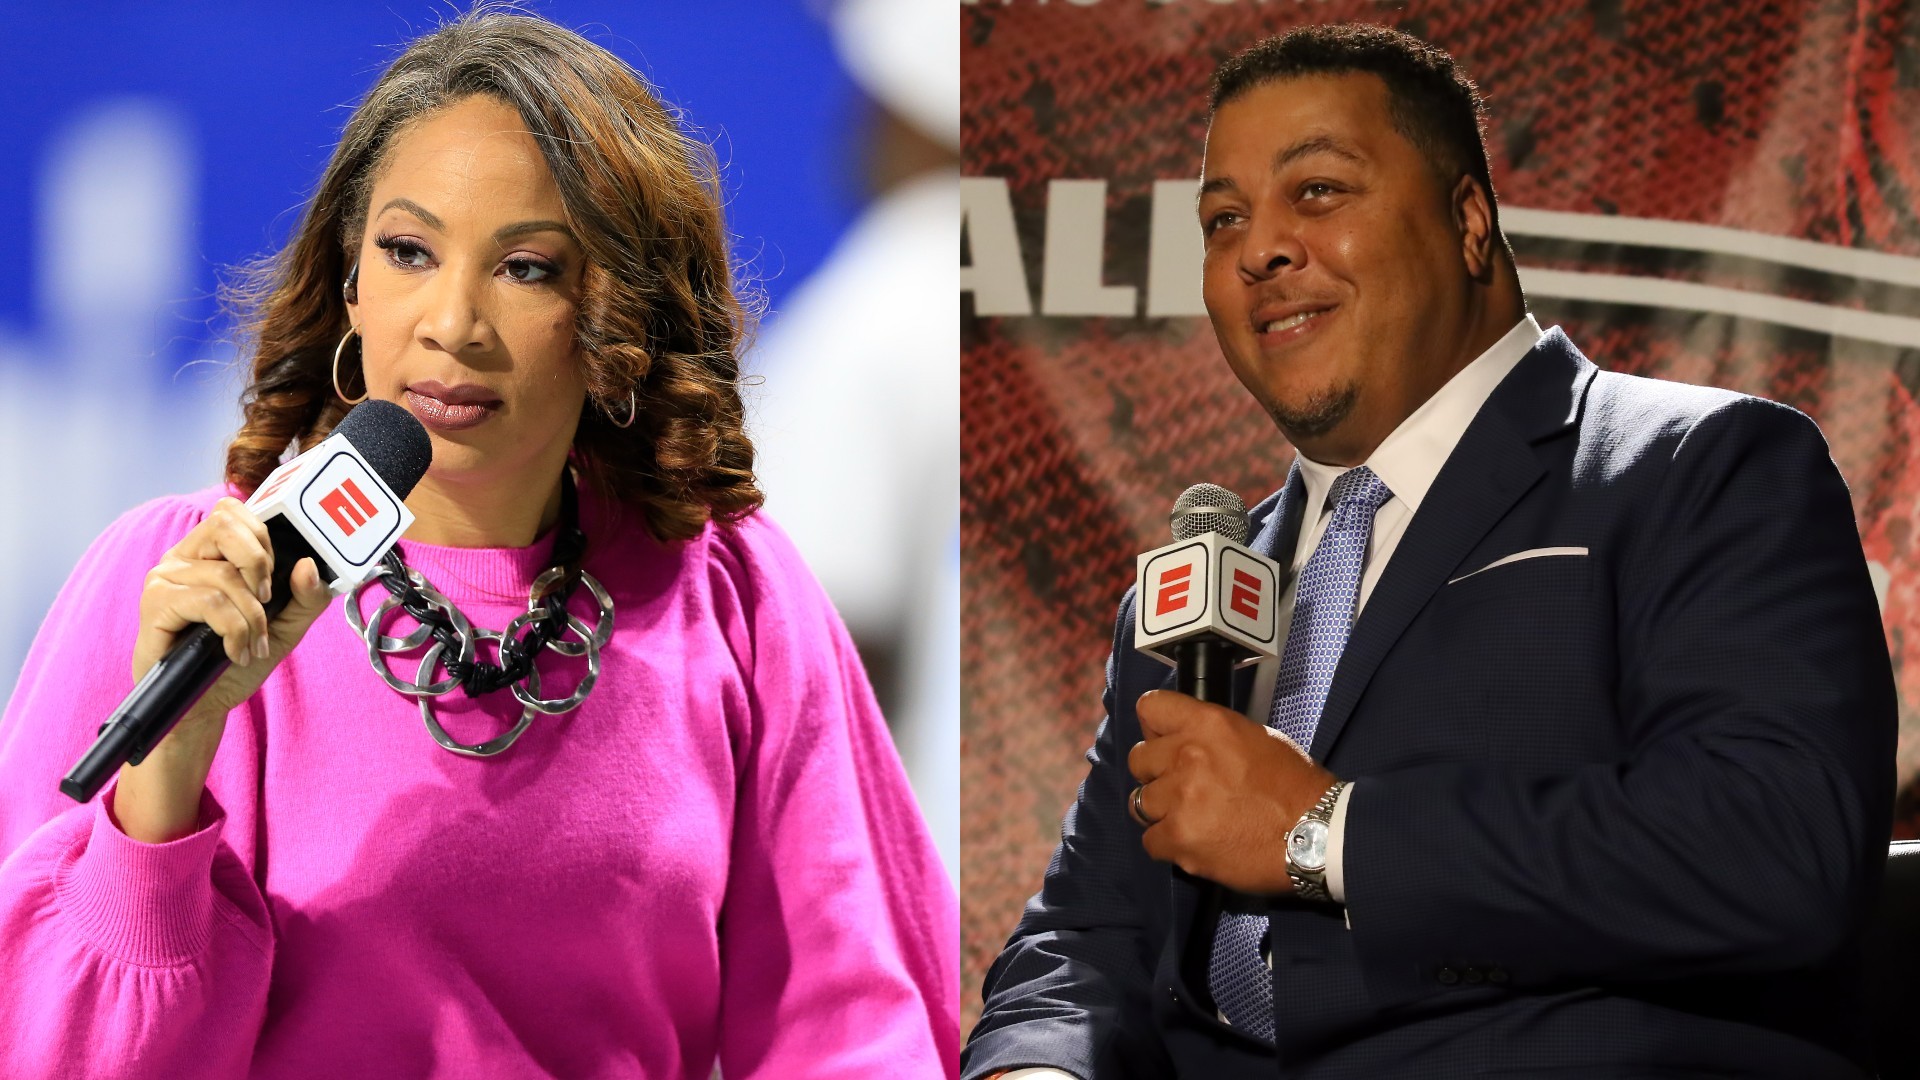 Celebration Bowl pits Florida A&M against Howard, starting with the ESPN announcers